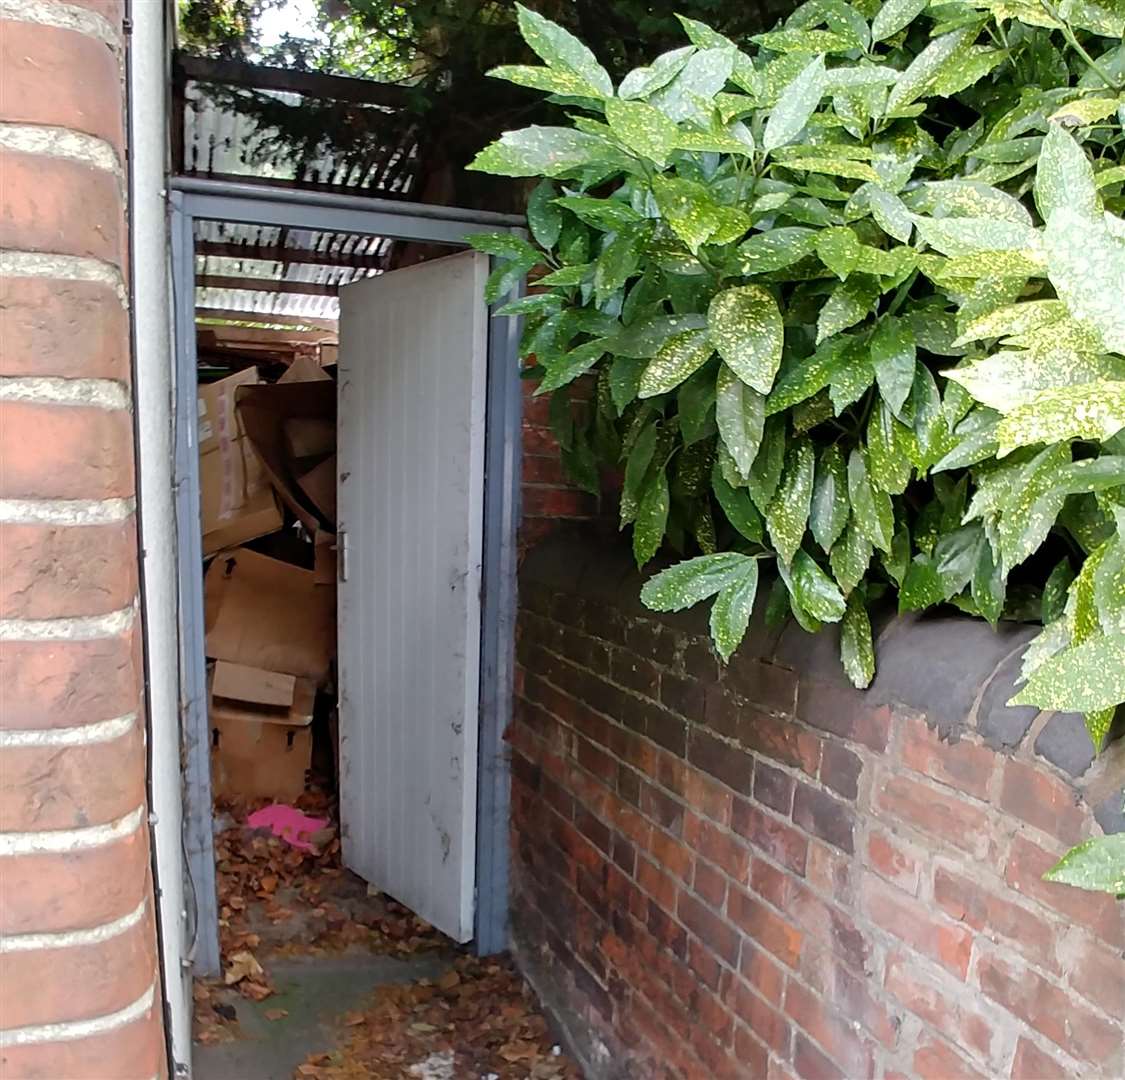 The lean-to filled with waste at the property in Old Dover Road